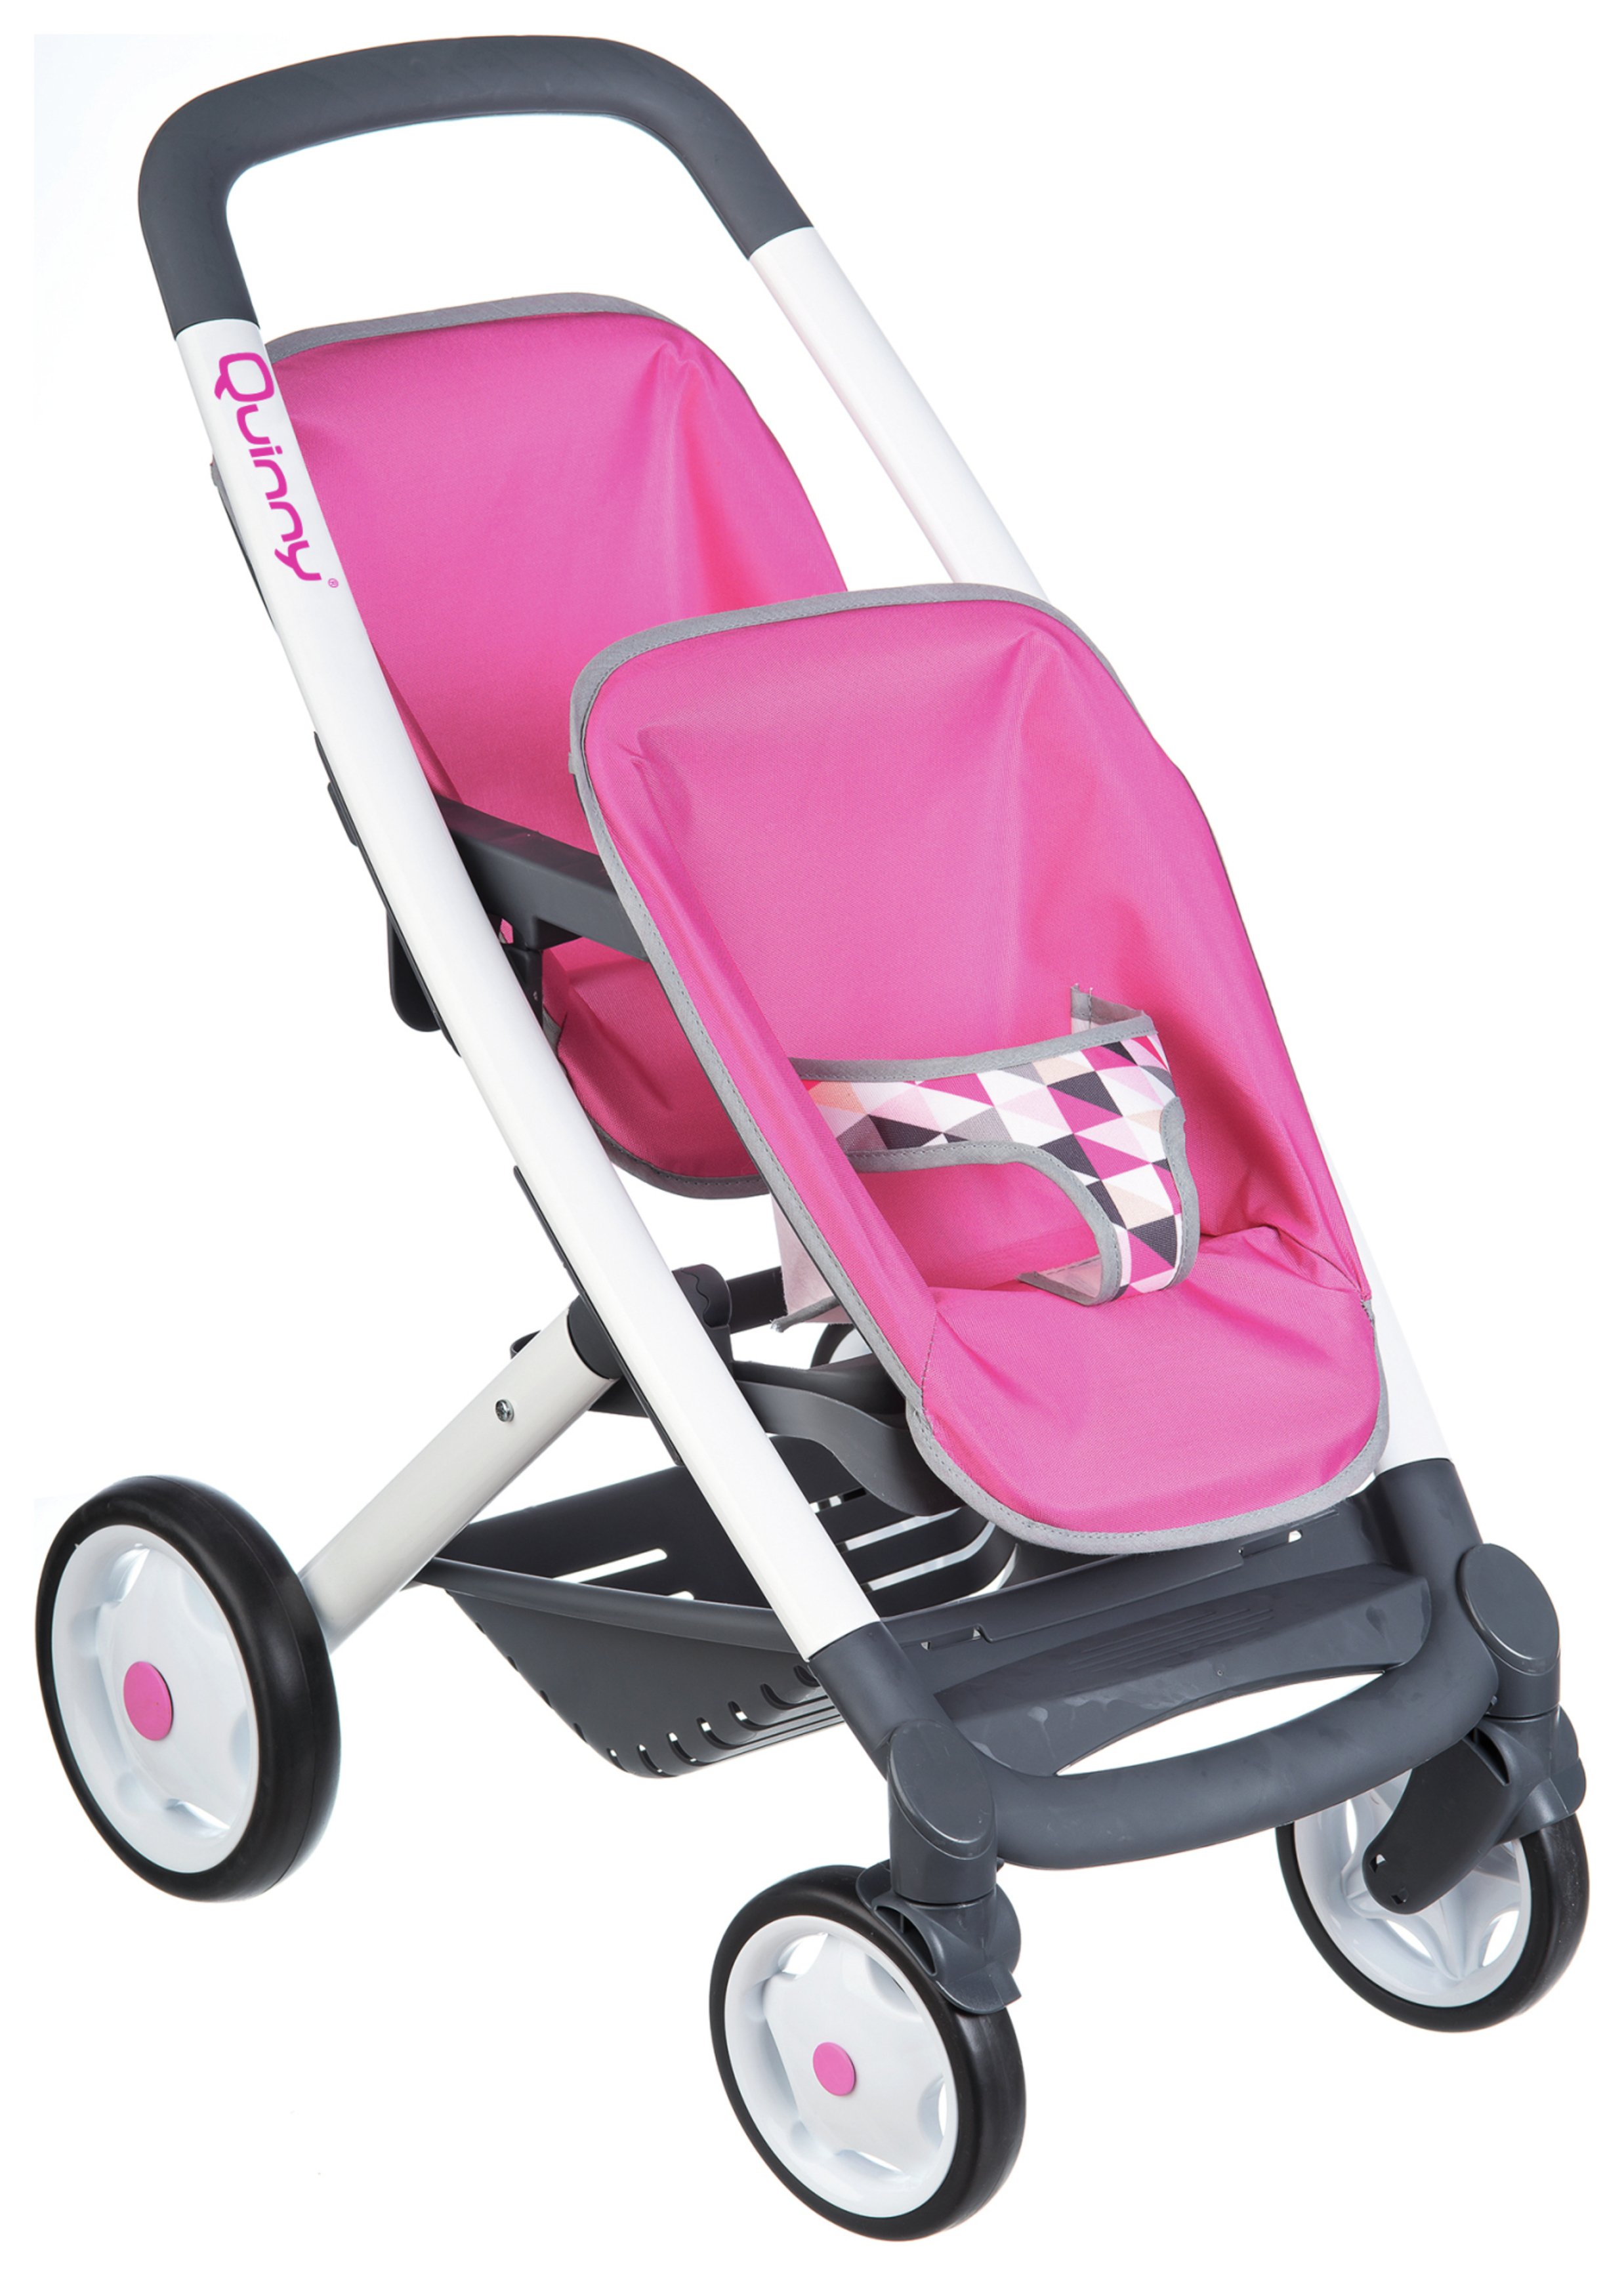 Smoby Maxi-Cosi Quinny Twin Dolls Pushchair Review